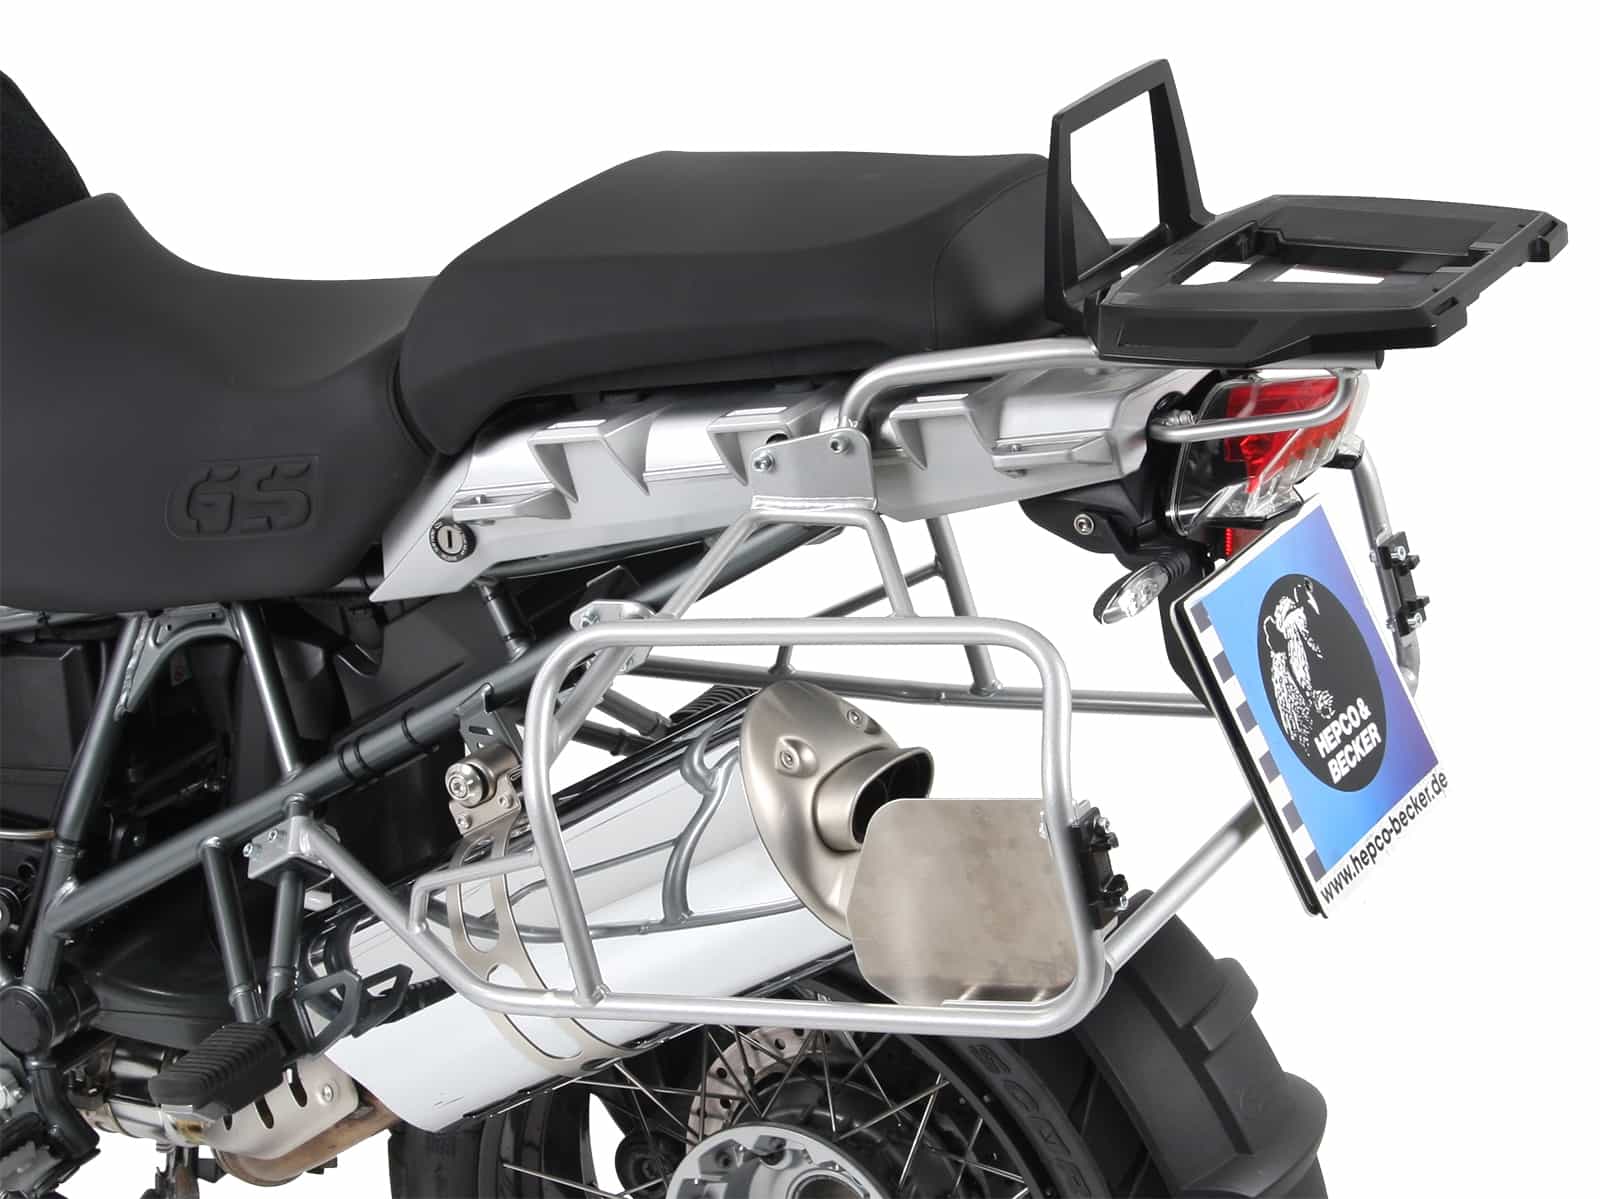 Sidecarrier Cutout stainless steel incl. Xplorer sideboxes silver for BMW R1200GS (2004-2012) / Adventure (2006-2013)